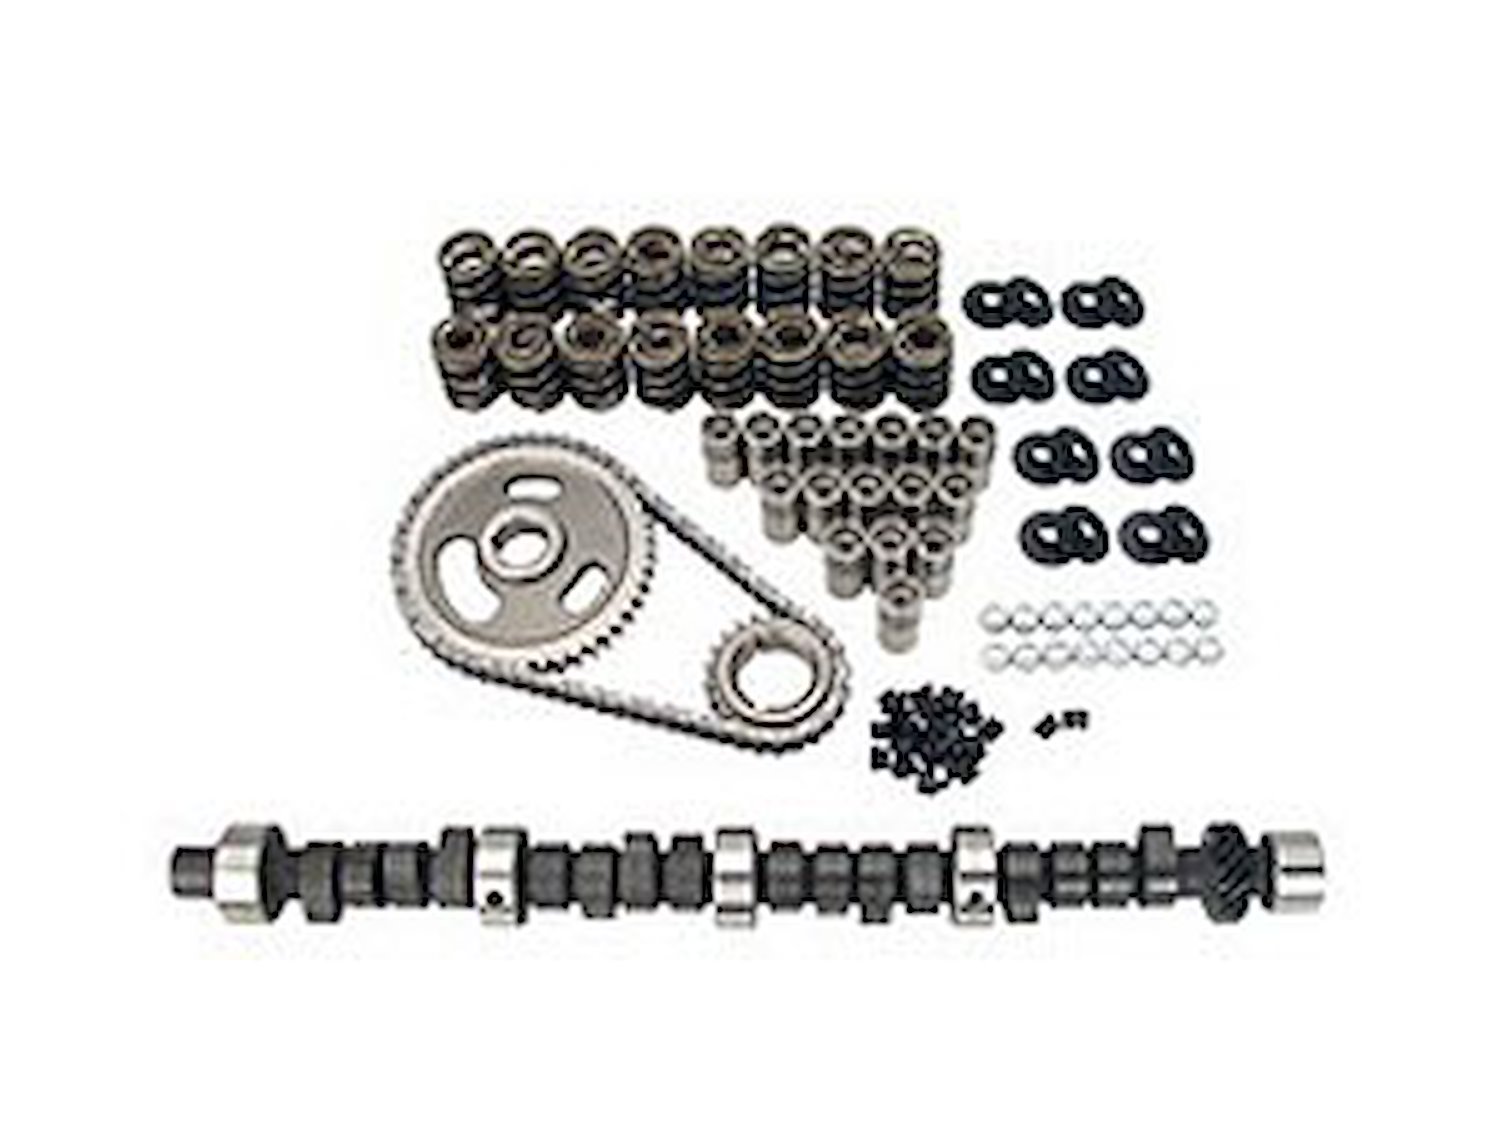 Mutha Thumpr Hydraulic Flat Tappet Camshaft and Lifter Kit Single-Bolt Lift .497"/.483" Duration 287/304 RPM Range 2200-6100